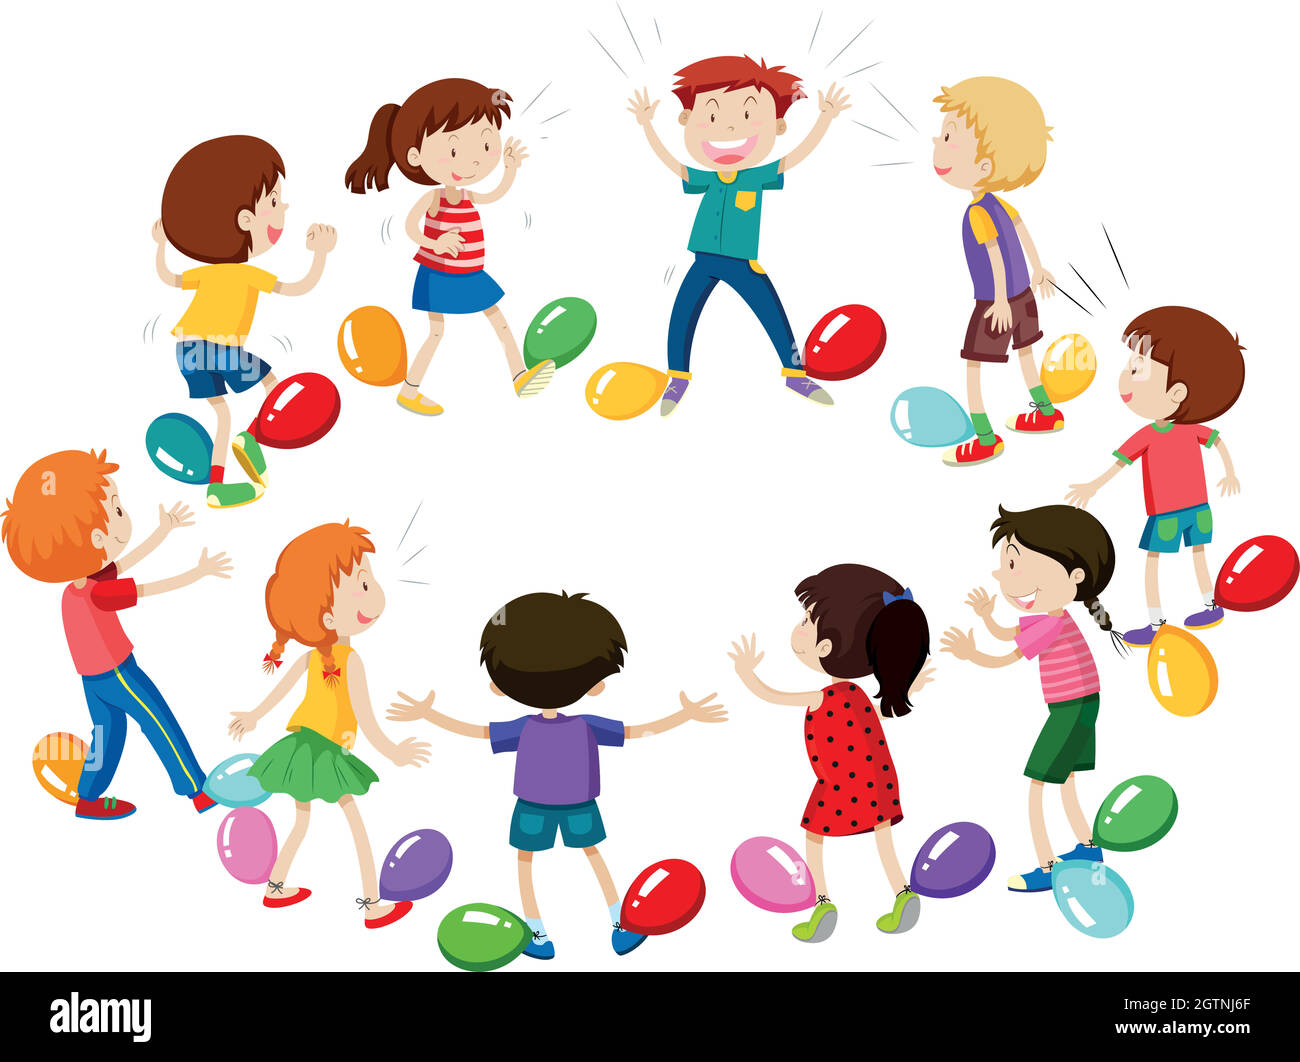 Children playing game of balloon popping Stock Vector